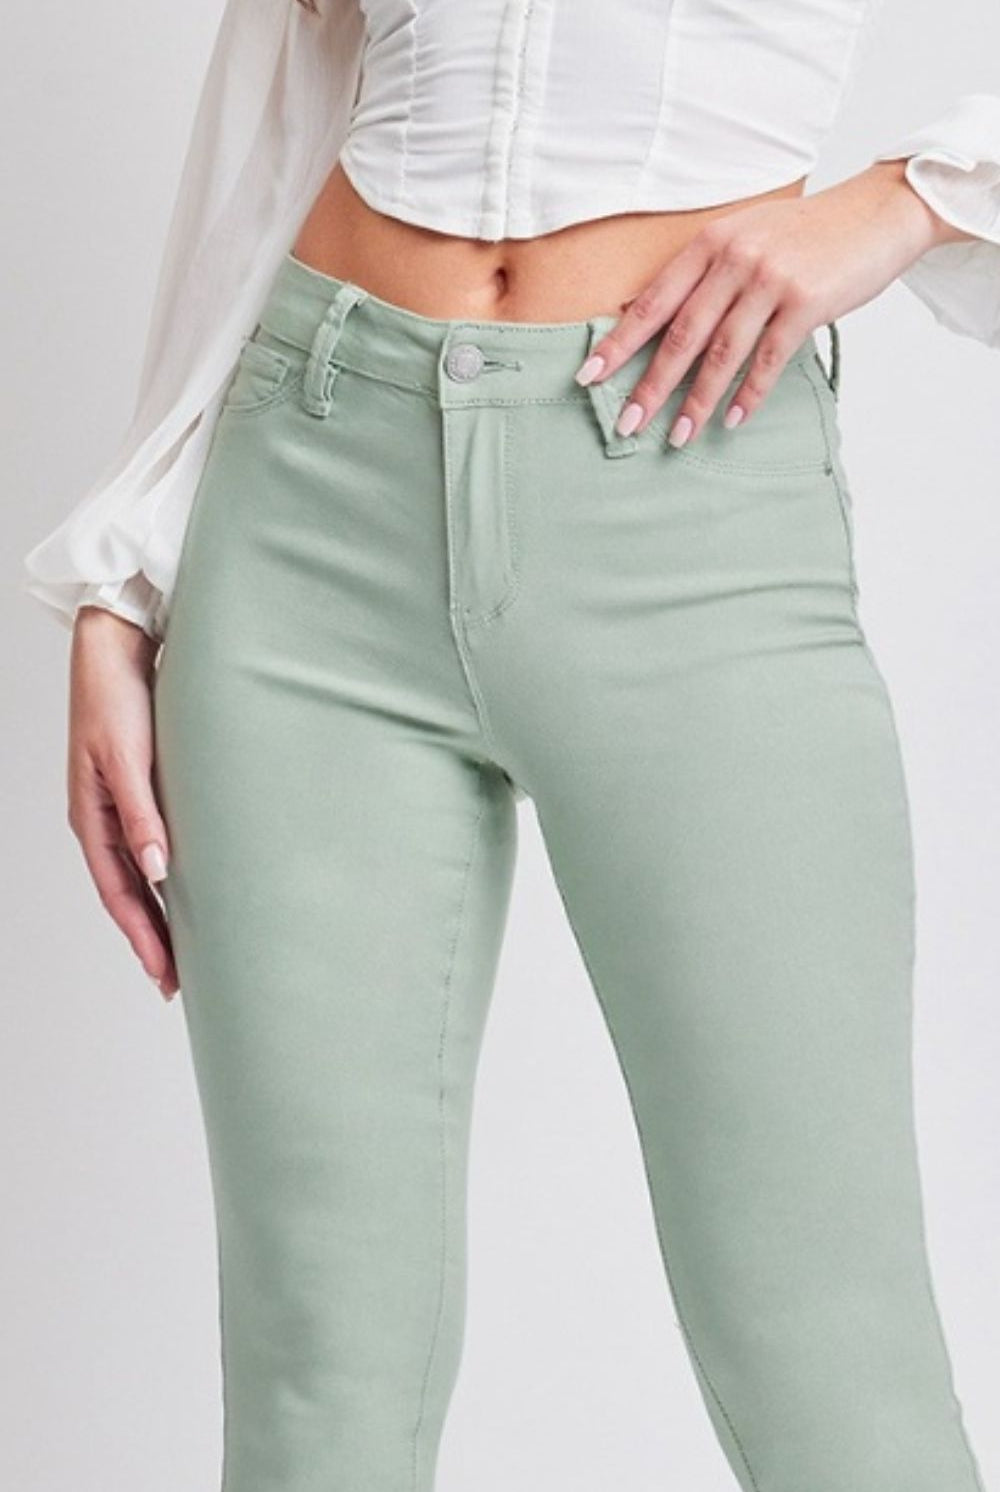 Model wearing stylish jade green mid-rise skinny jeans, exuding confidence and trendy vibes.